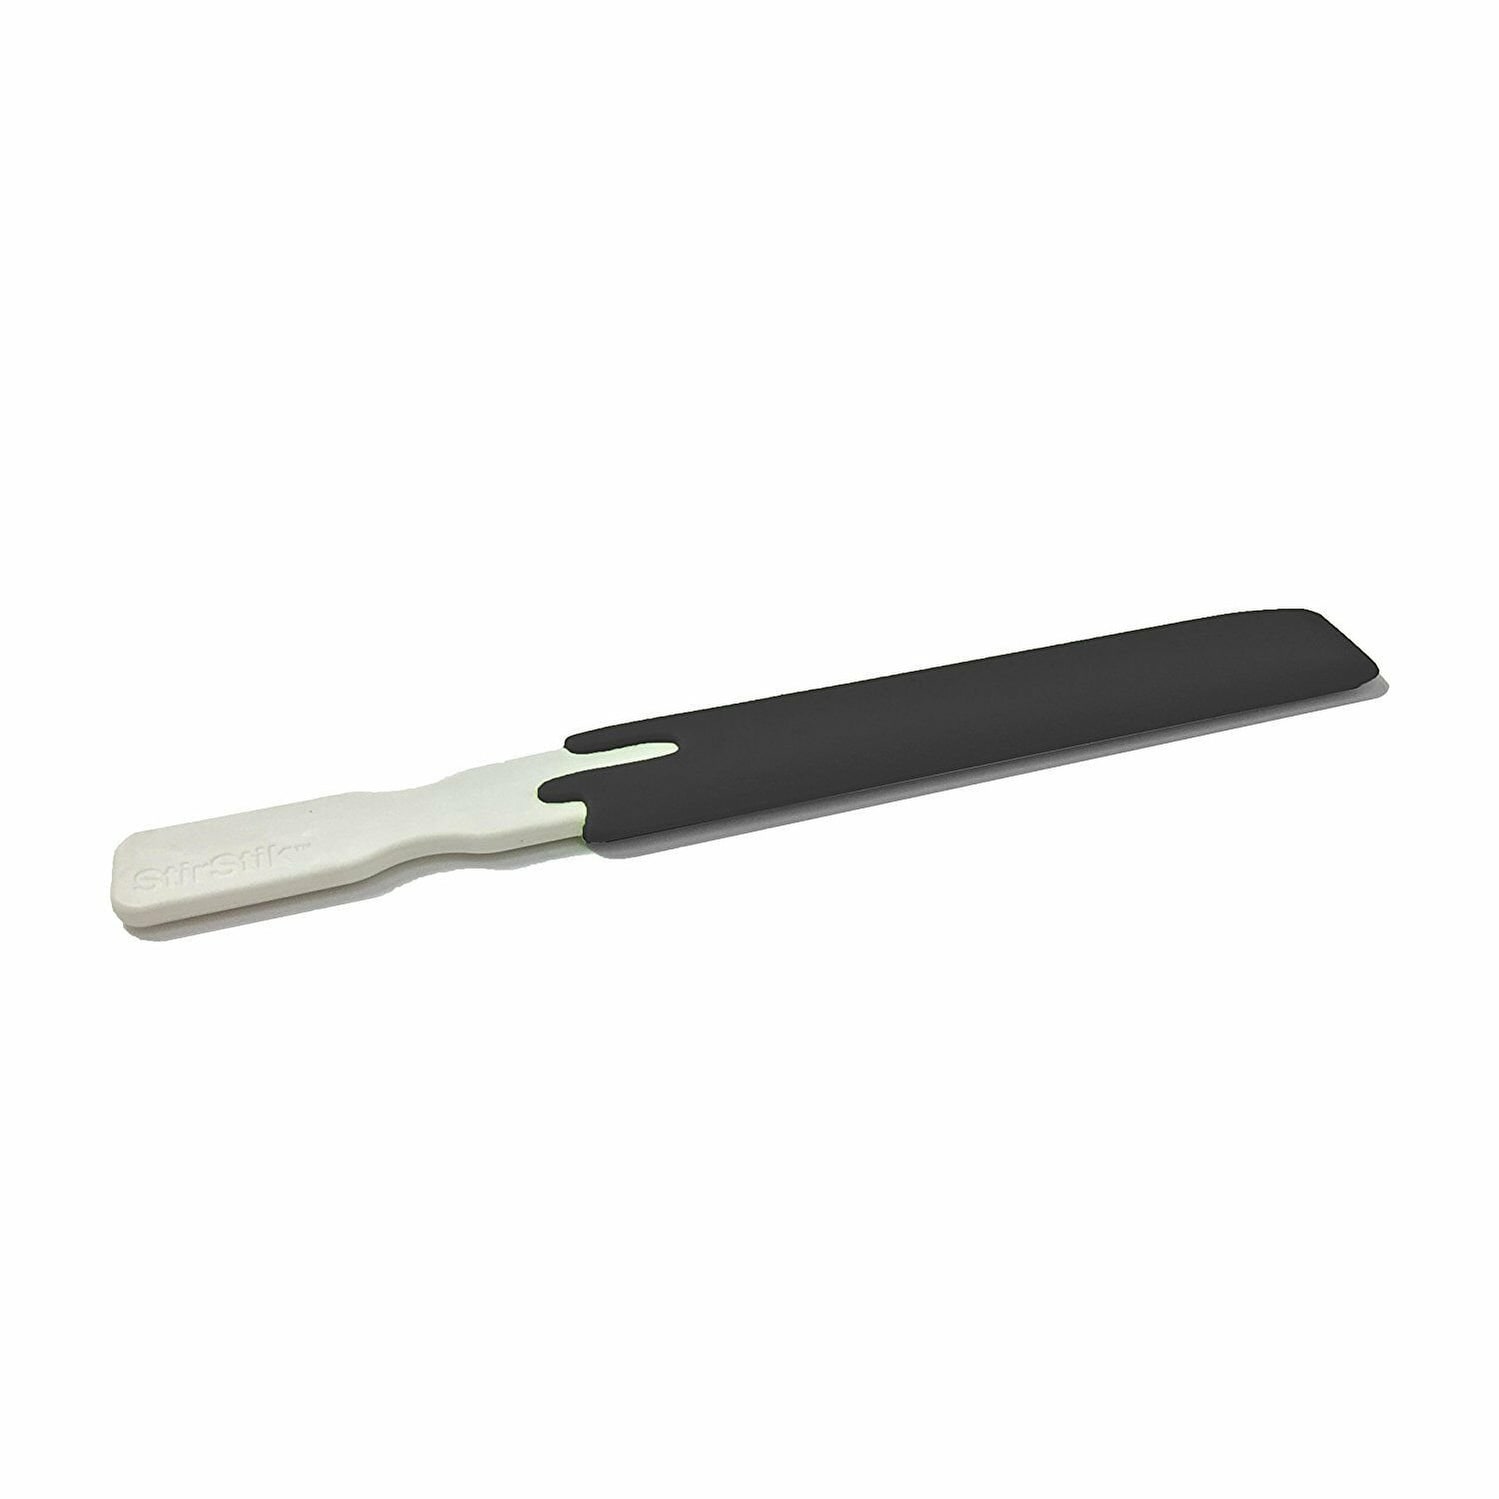 https://ak1.ostkcdn.com/images/products/is/images/direct/0d7cca2dfa417cdf7ae221c146c872d609ad1980/8%22-Long-Silicone-Kitchen-Stir-Stik-Mini---Stir%2C-Scrape-and-Spread-Food-with-Ease%2C-BPA-Free-FDA-Food-Safe-Nylon-and....jpg